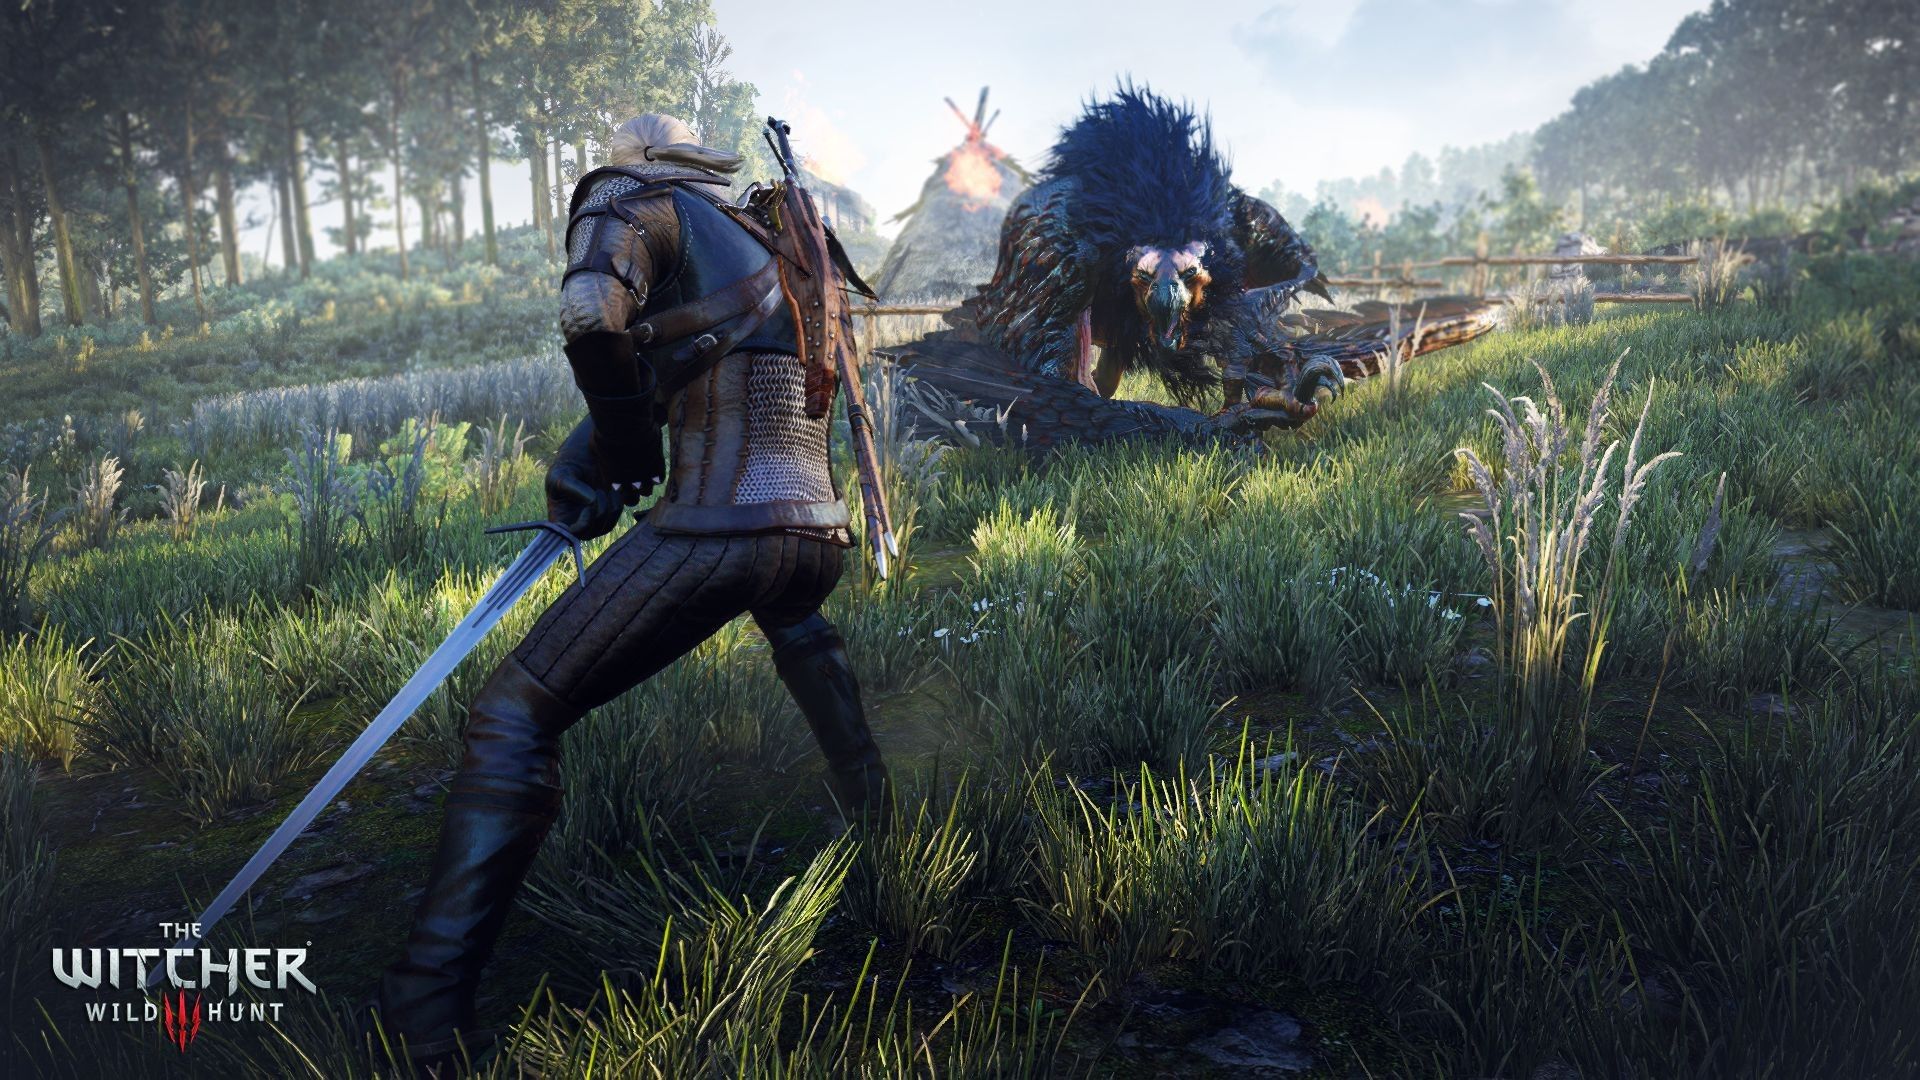 CD Projekt Signs New Agreement with The Witcher Author